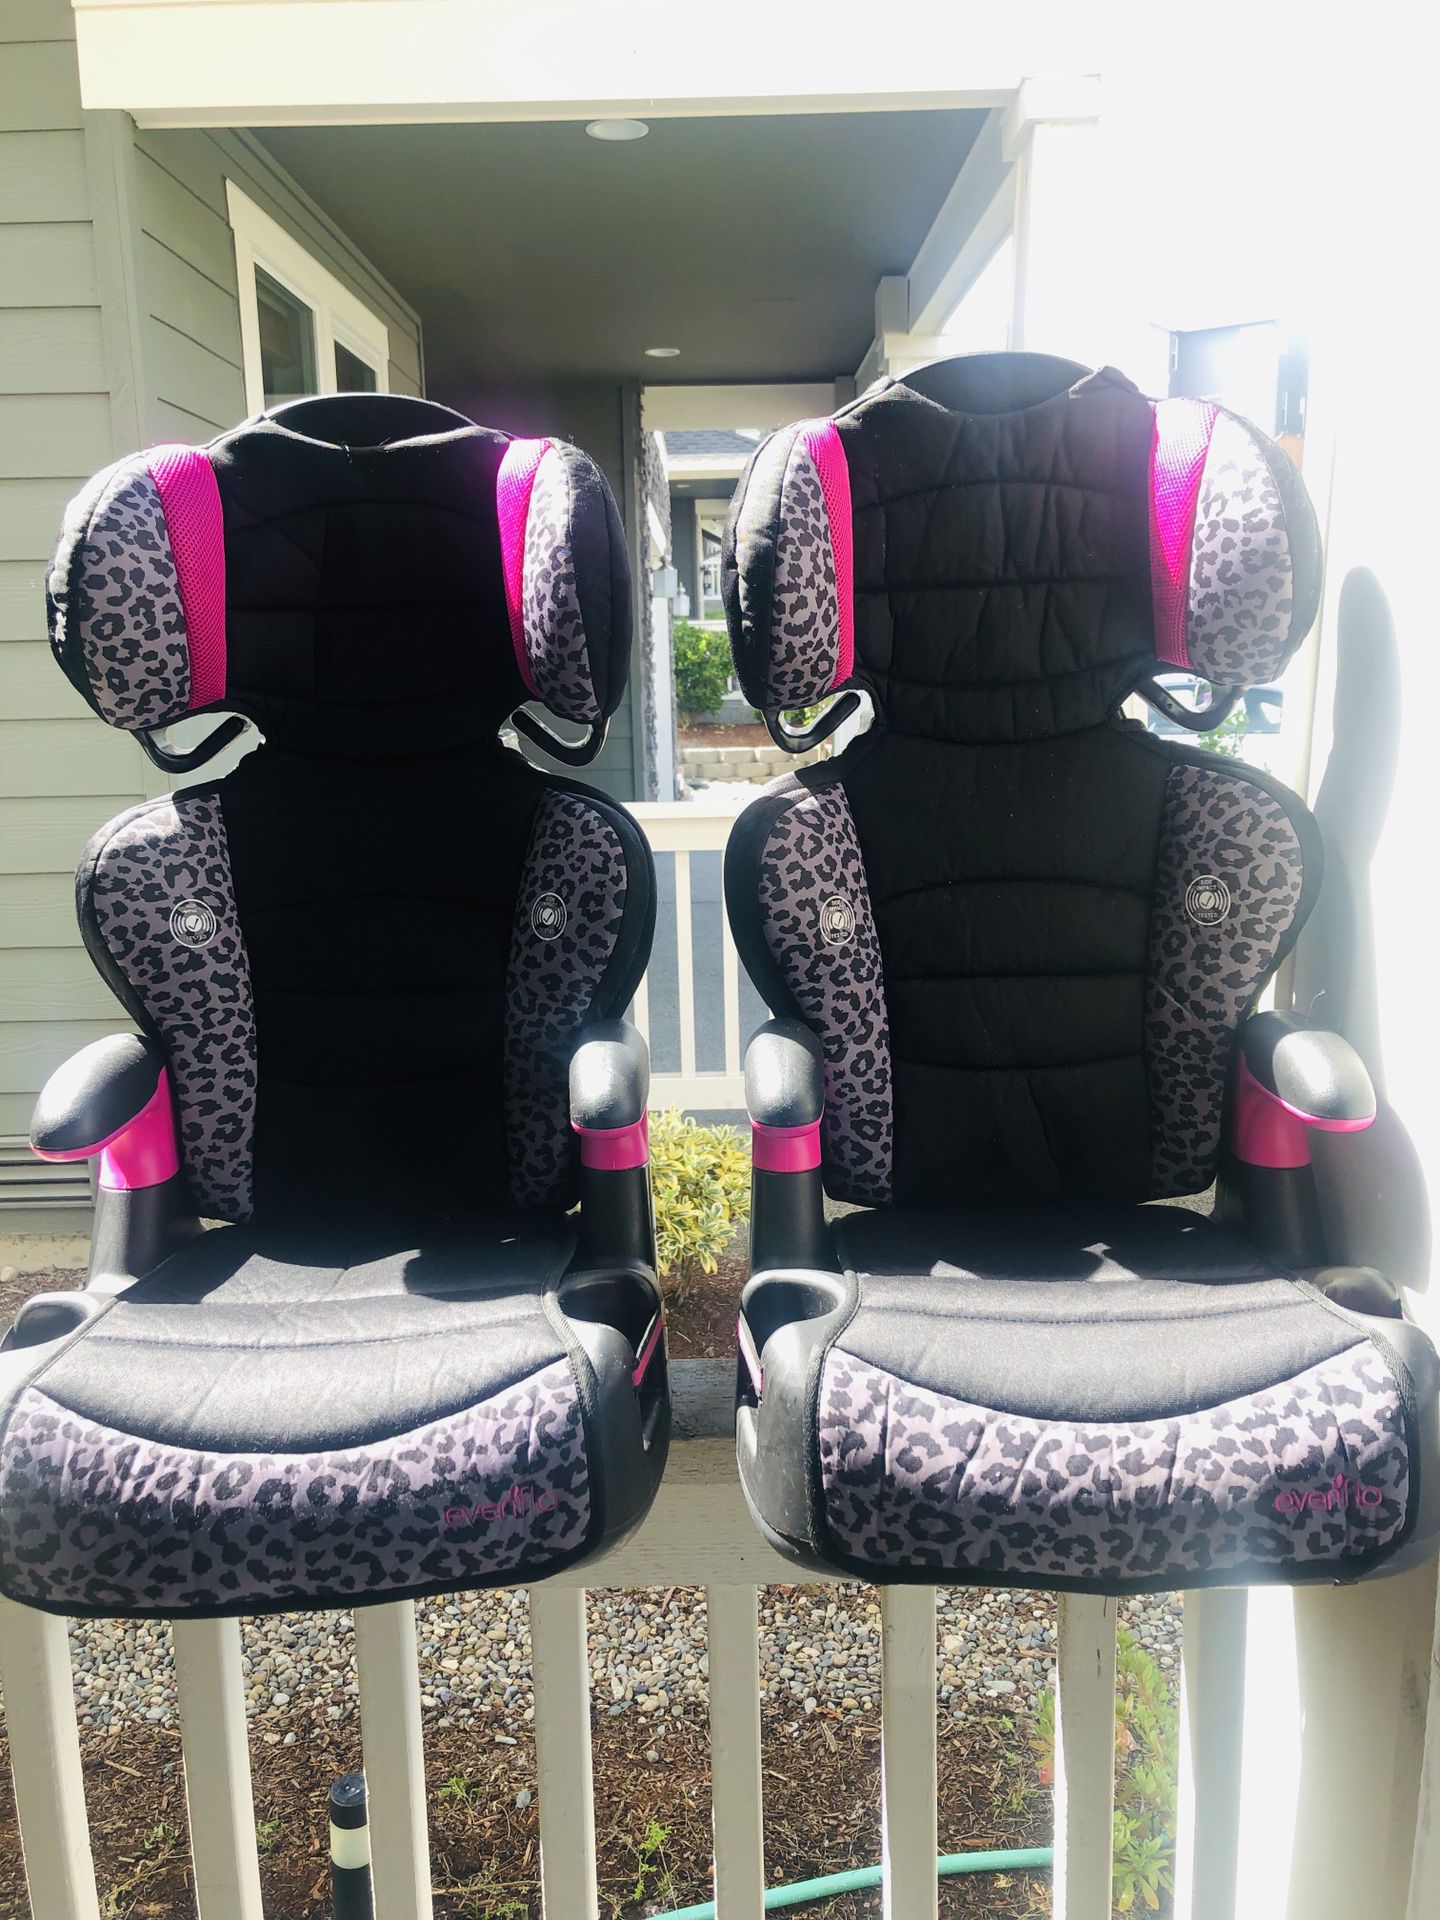 2 Evenflo Front Facing Car Seat/ Booster Seats. $25 Each